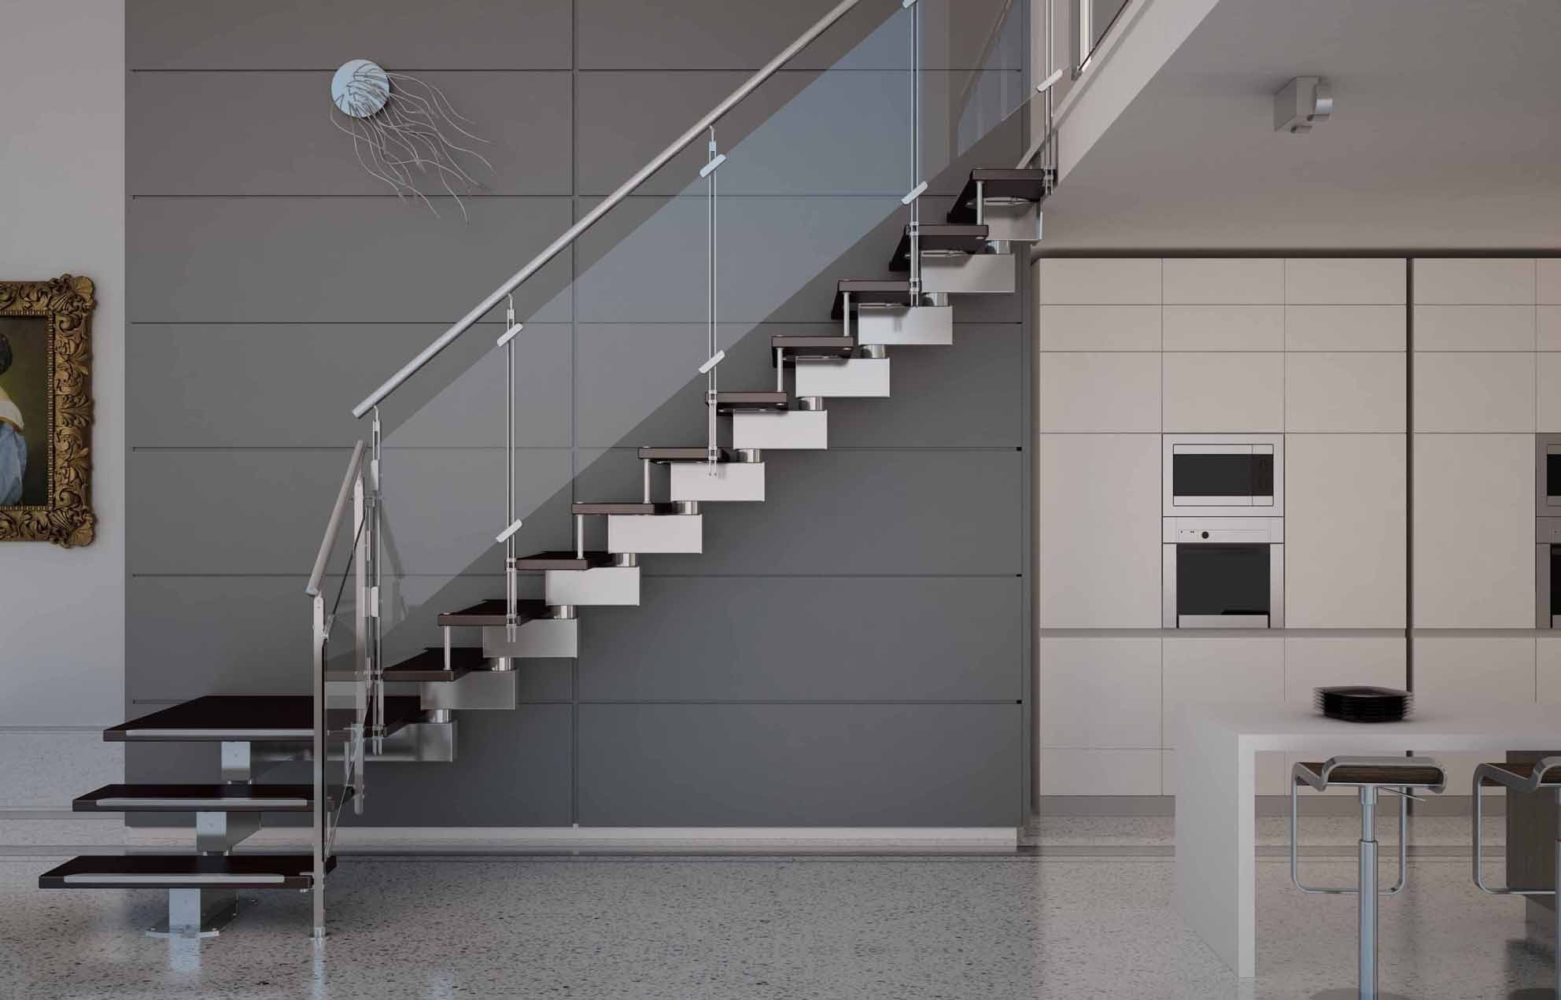 Staircase with the glass railing - Task Masters, Dubai